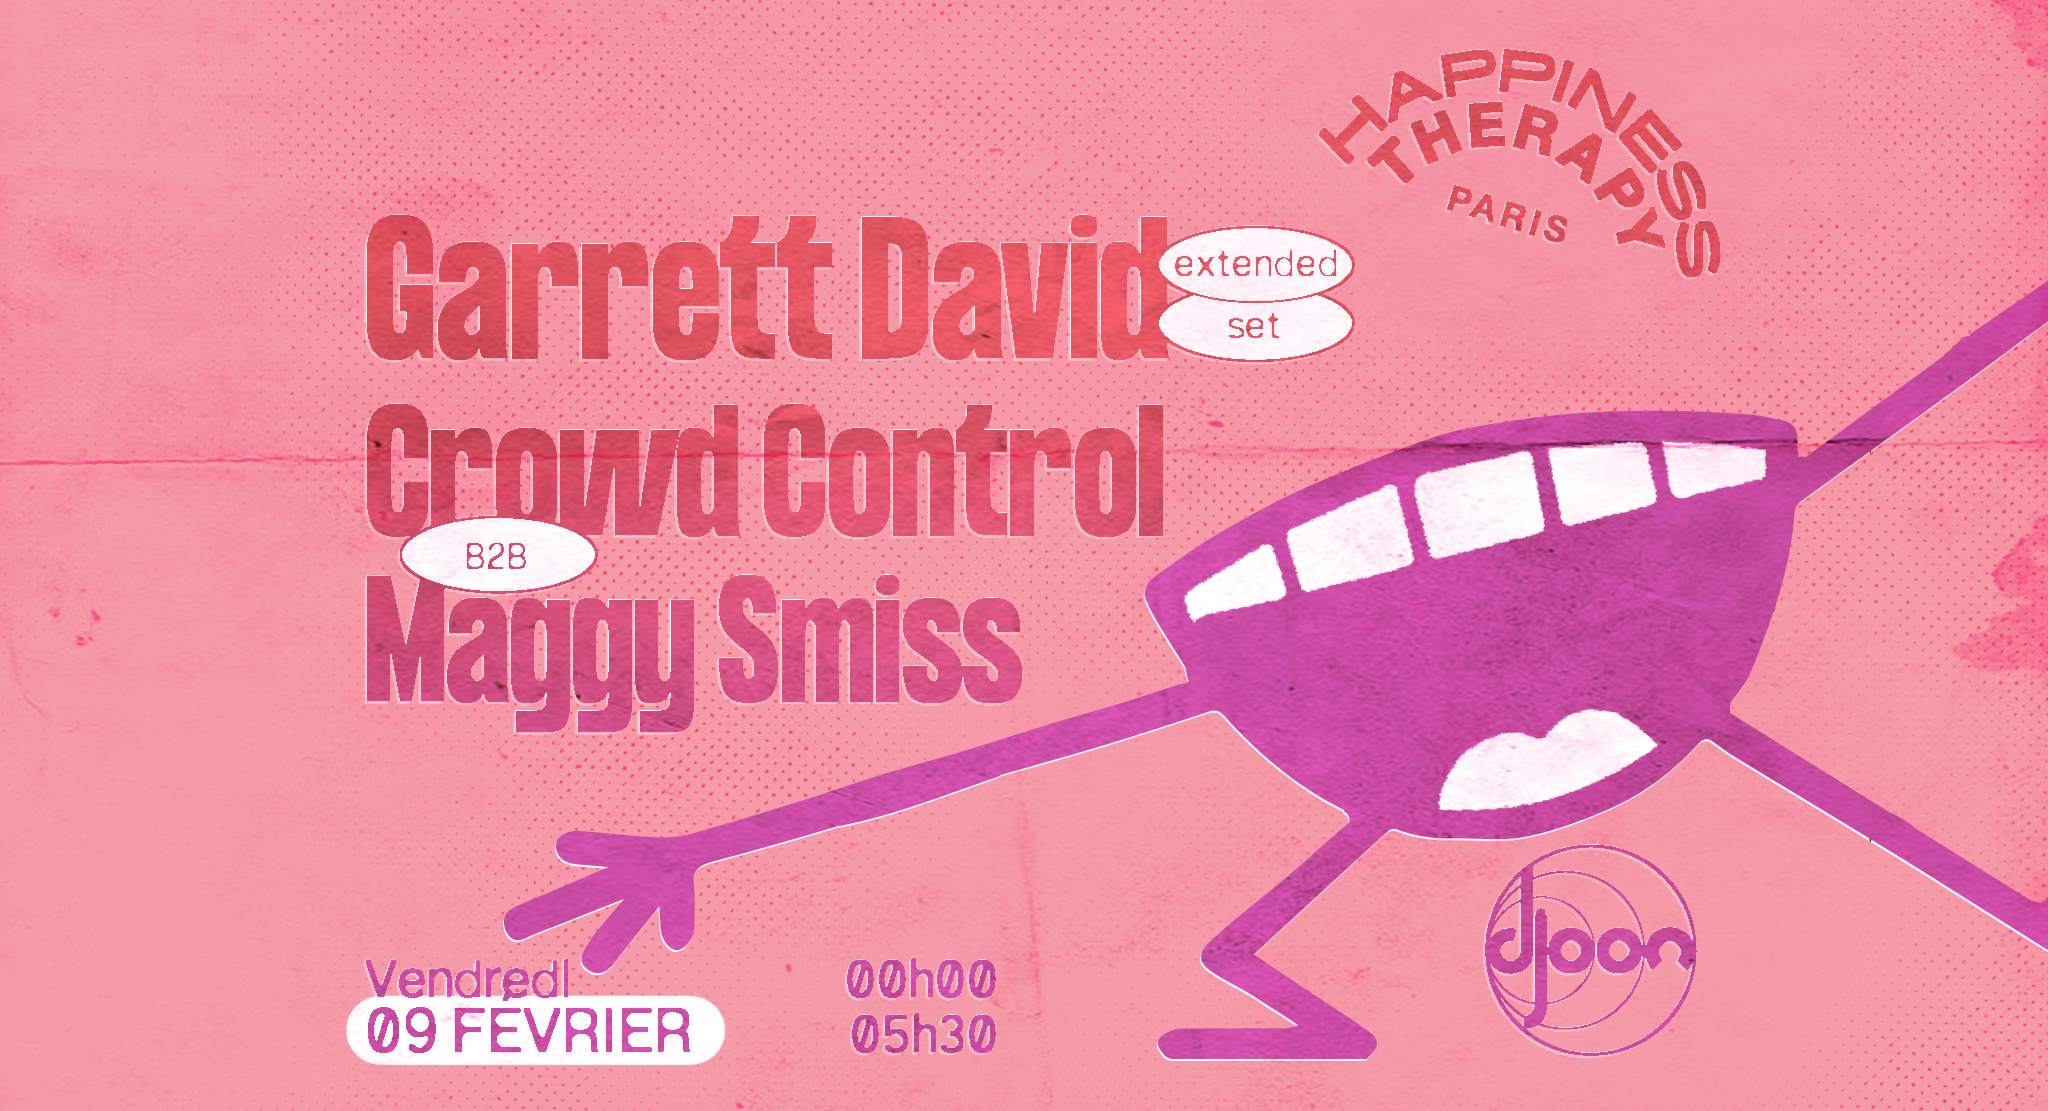 Happiness Therapy: Garrett David extended set, Crowd Control b2b Maggy Smiss - フライヤー表